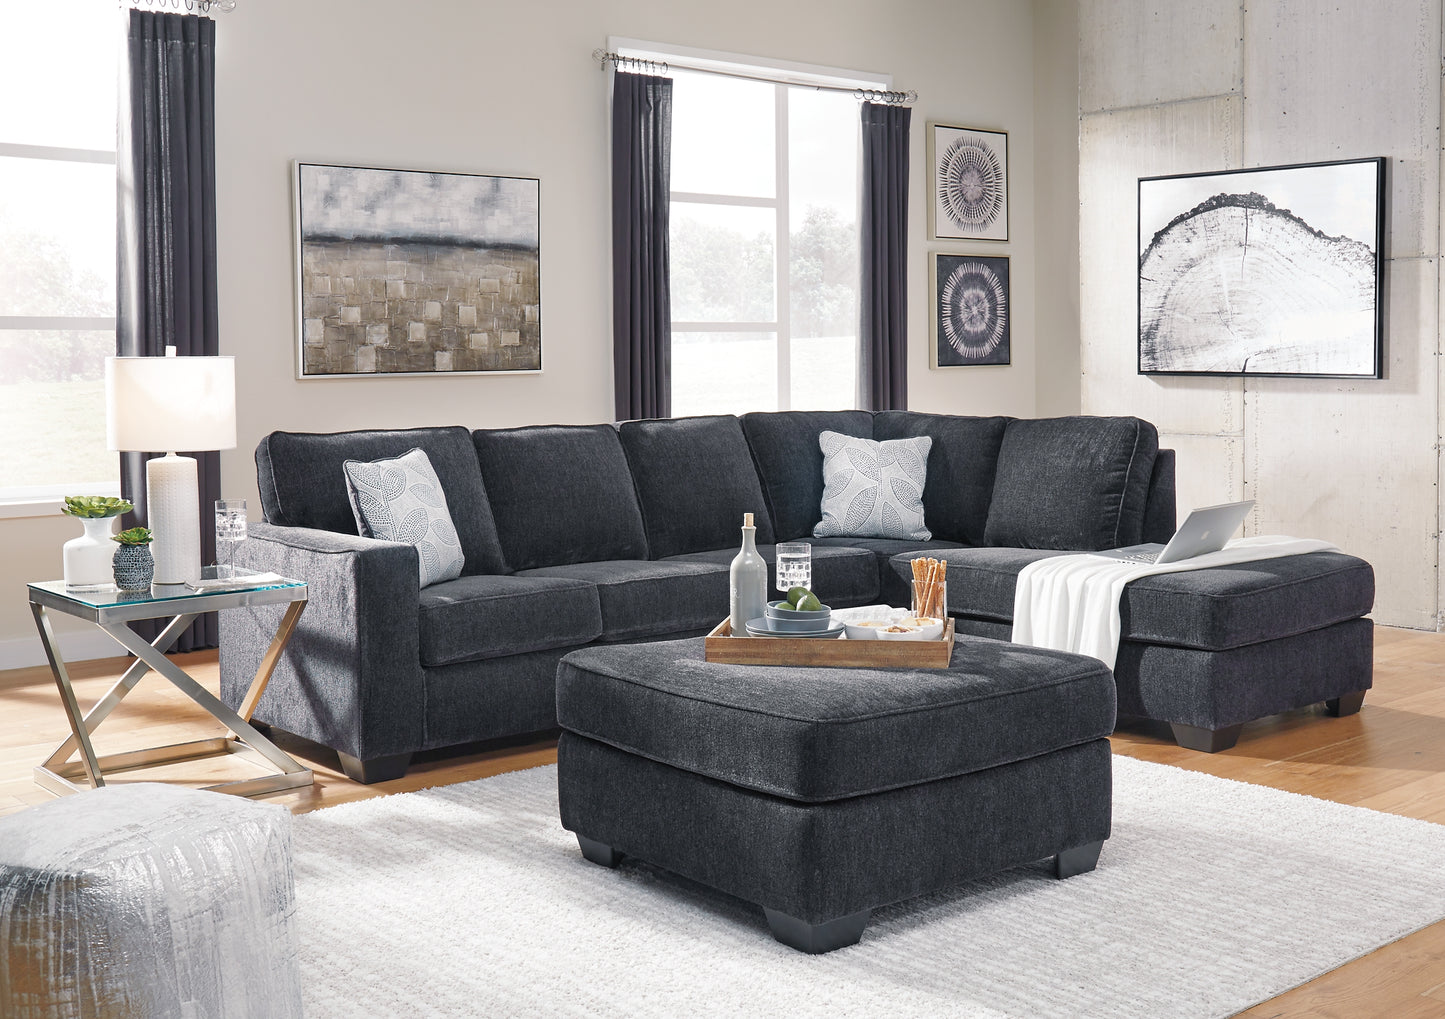 Altari 2-Piece Sectional with Ottoman